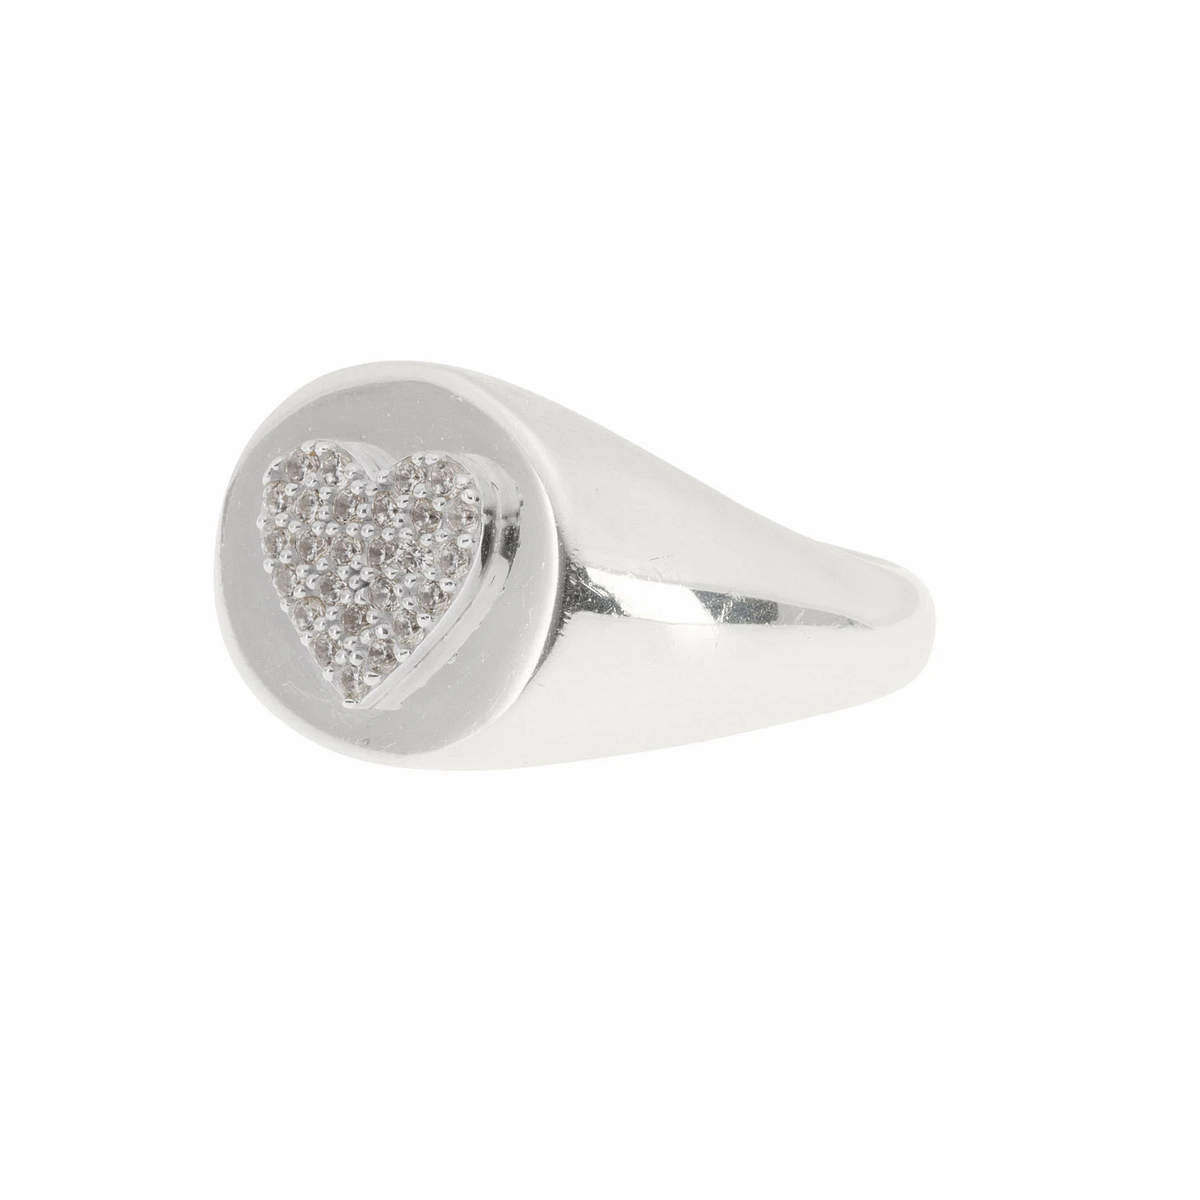 Sweetheart Signet Ring in Crystal